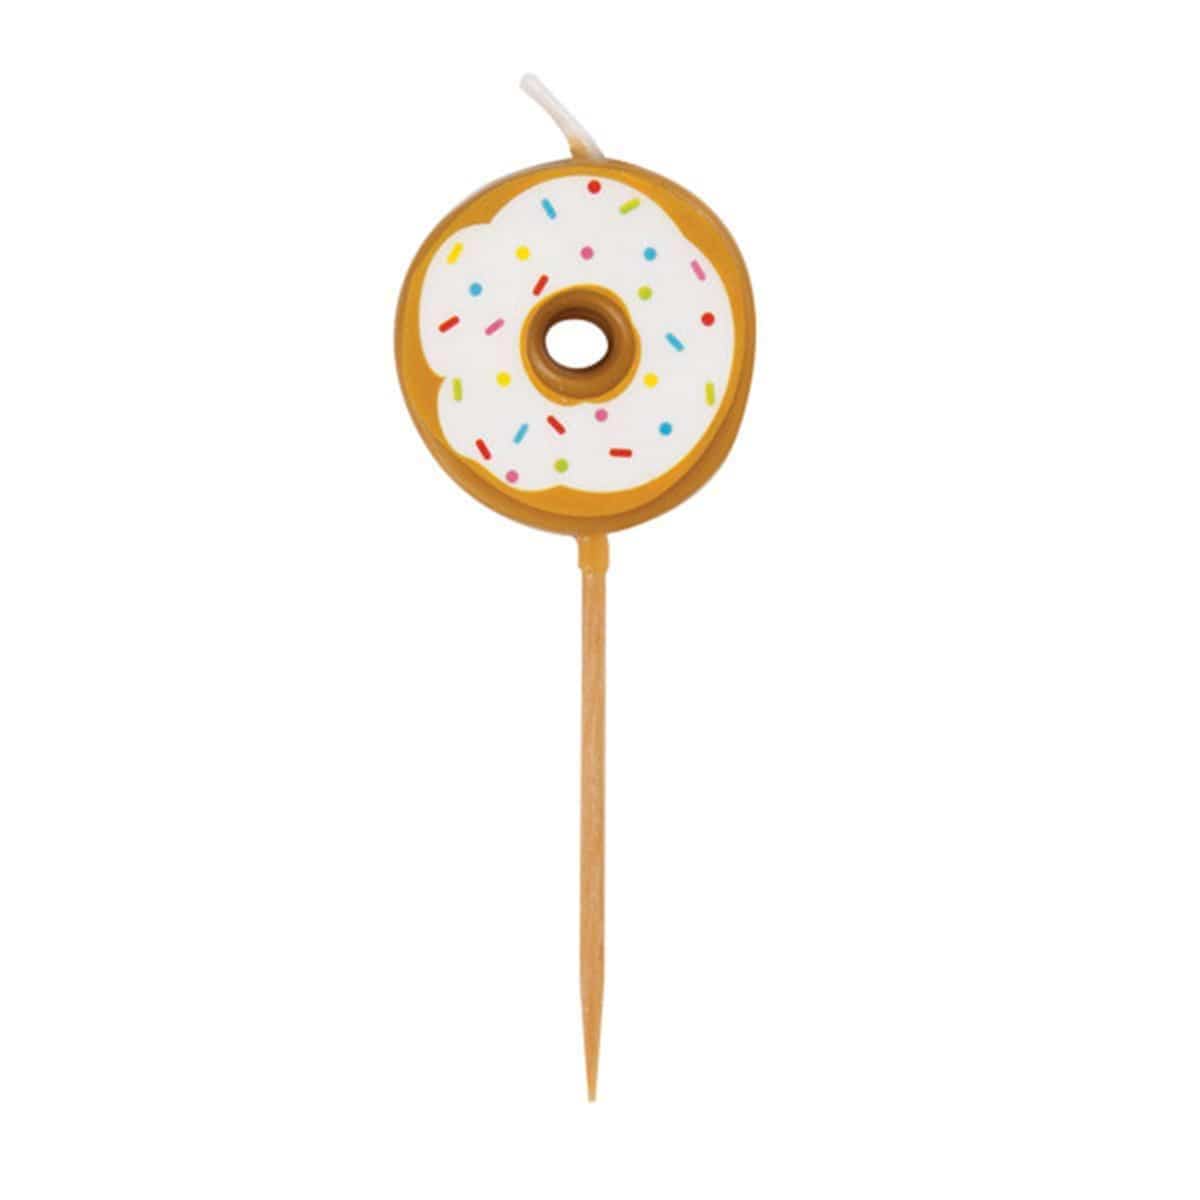 Buy Cake Supplies Donut Candles 6/pkg sold at Party Expert